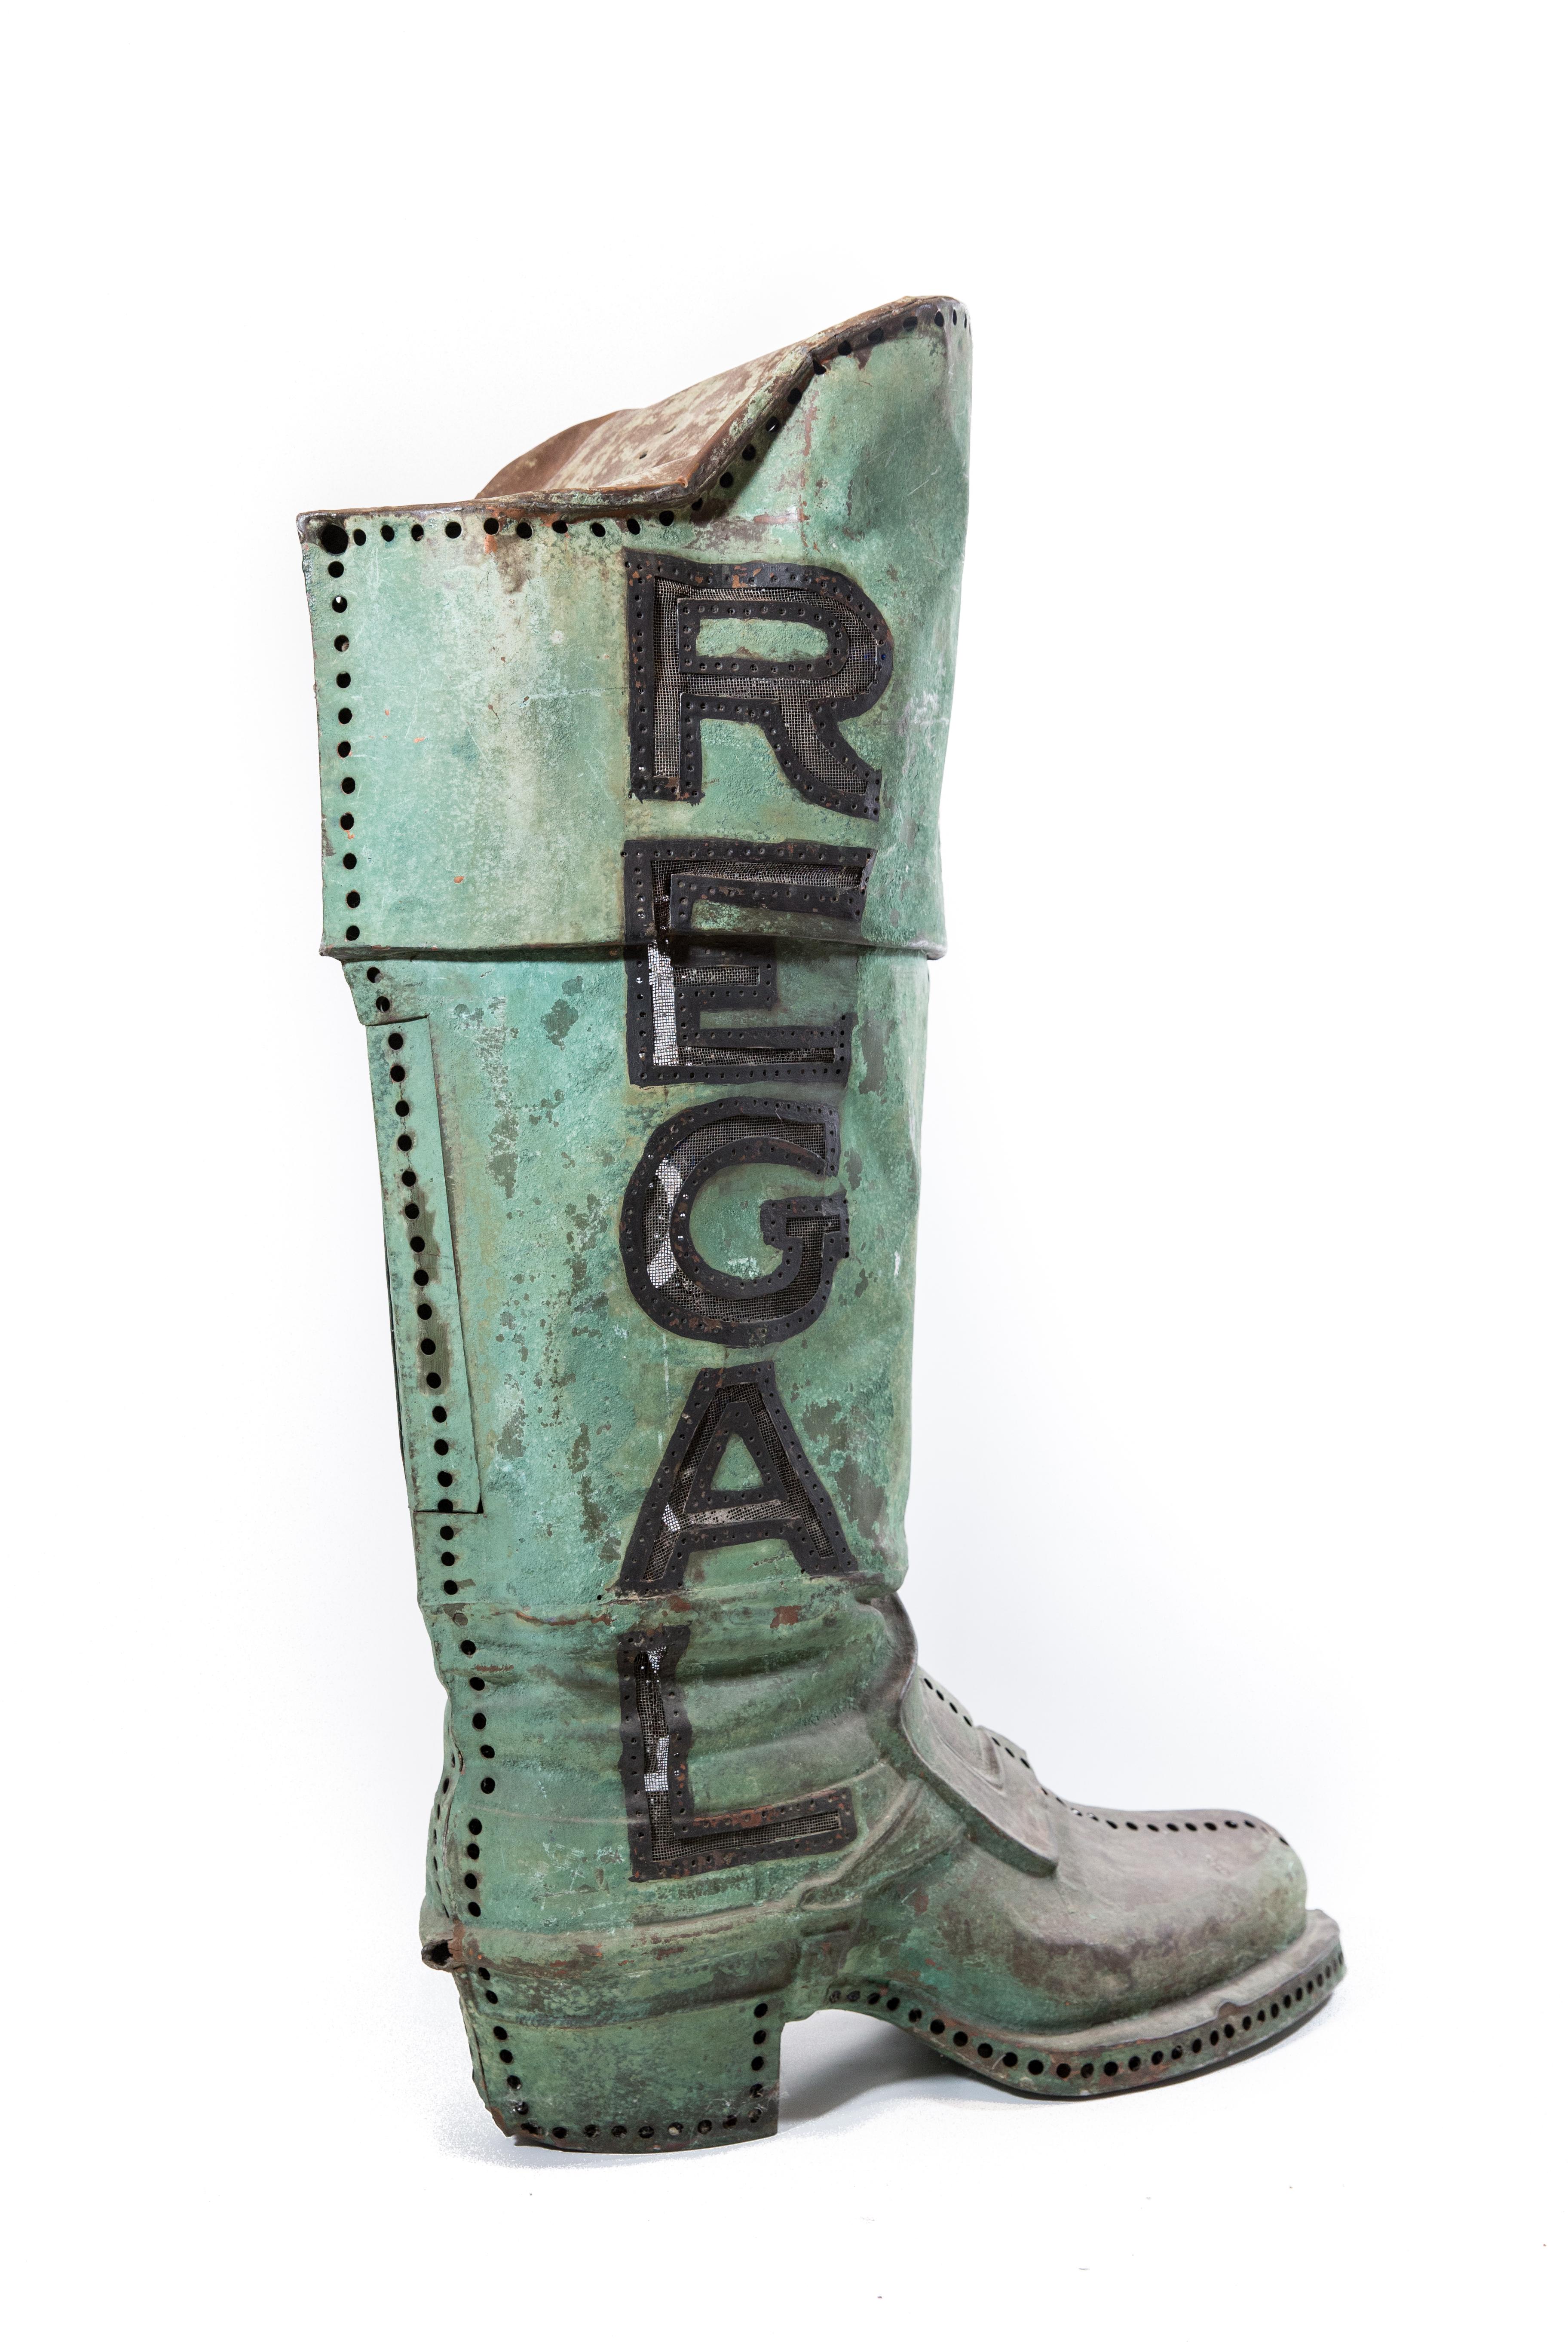 Hand-Crafted Large Antique Copper 3D Regal Boot Trade Sign